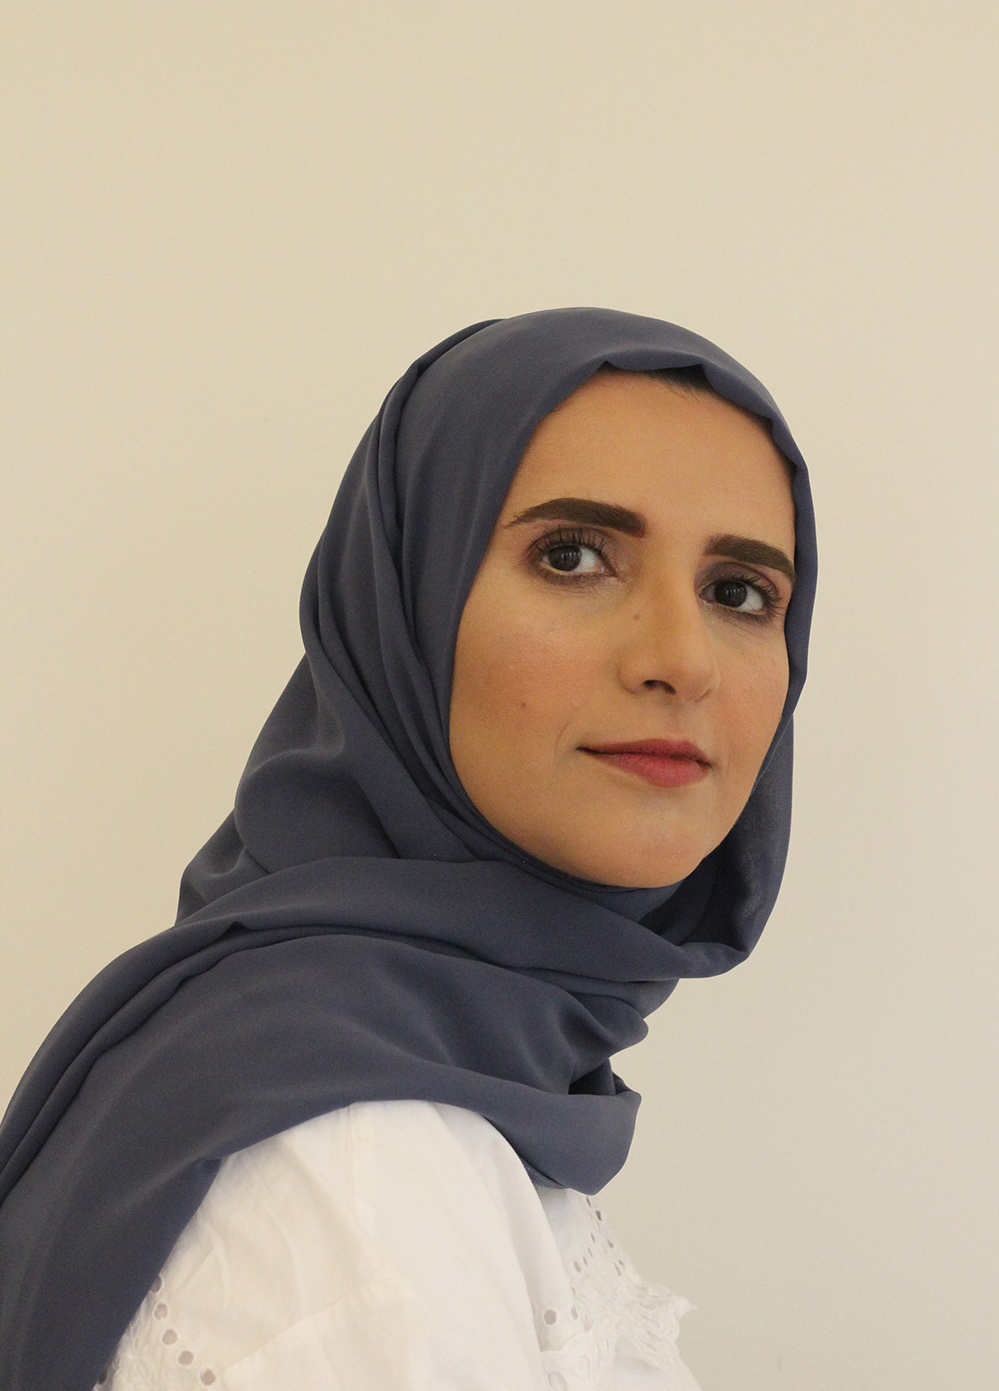 Jokha Alharthi, author of "Celestial Bodies" and winner of the Man Booker International Prize 2019. 